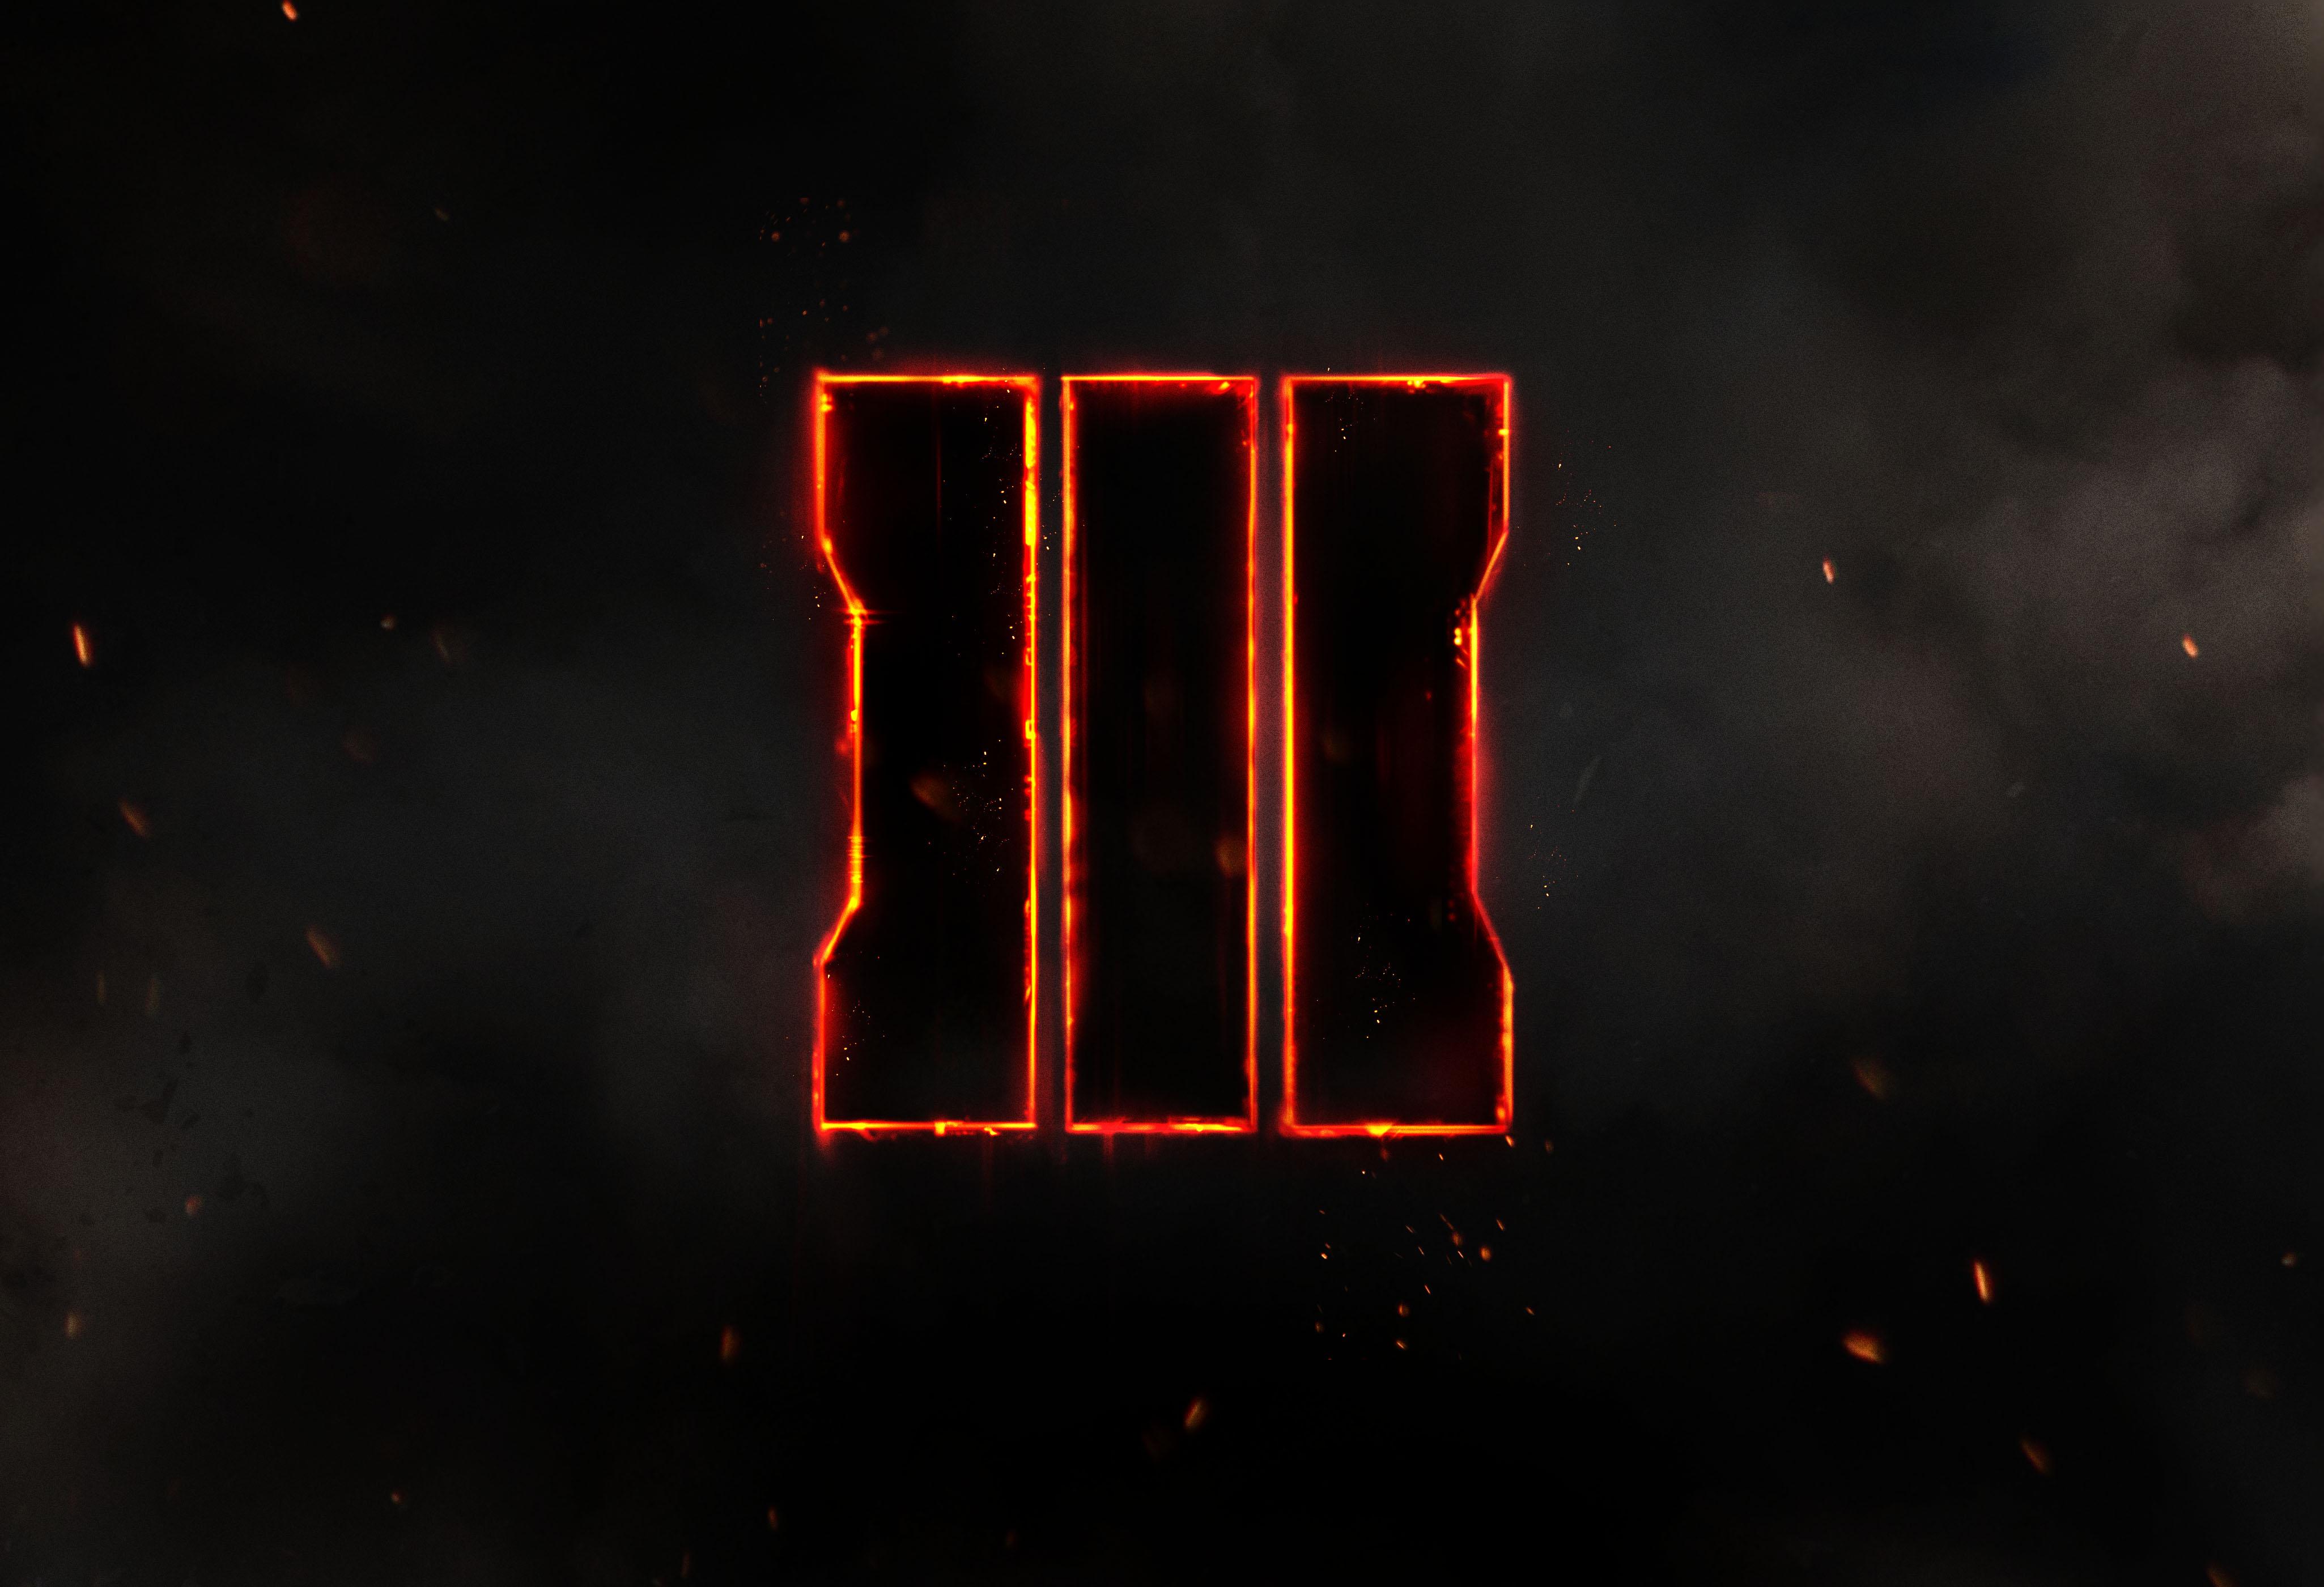 Call Of Duty Black Ops 3 Wallpapers | myideasbedroom.com